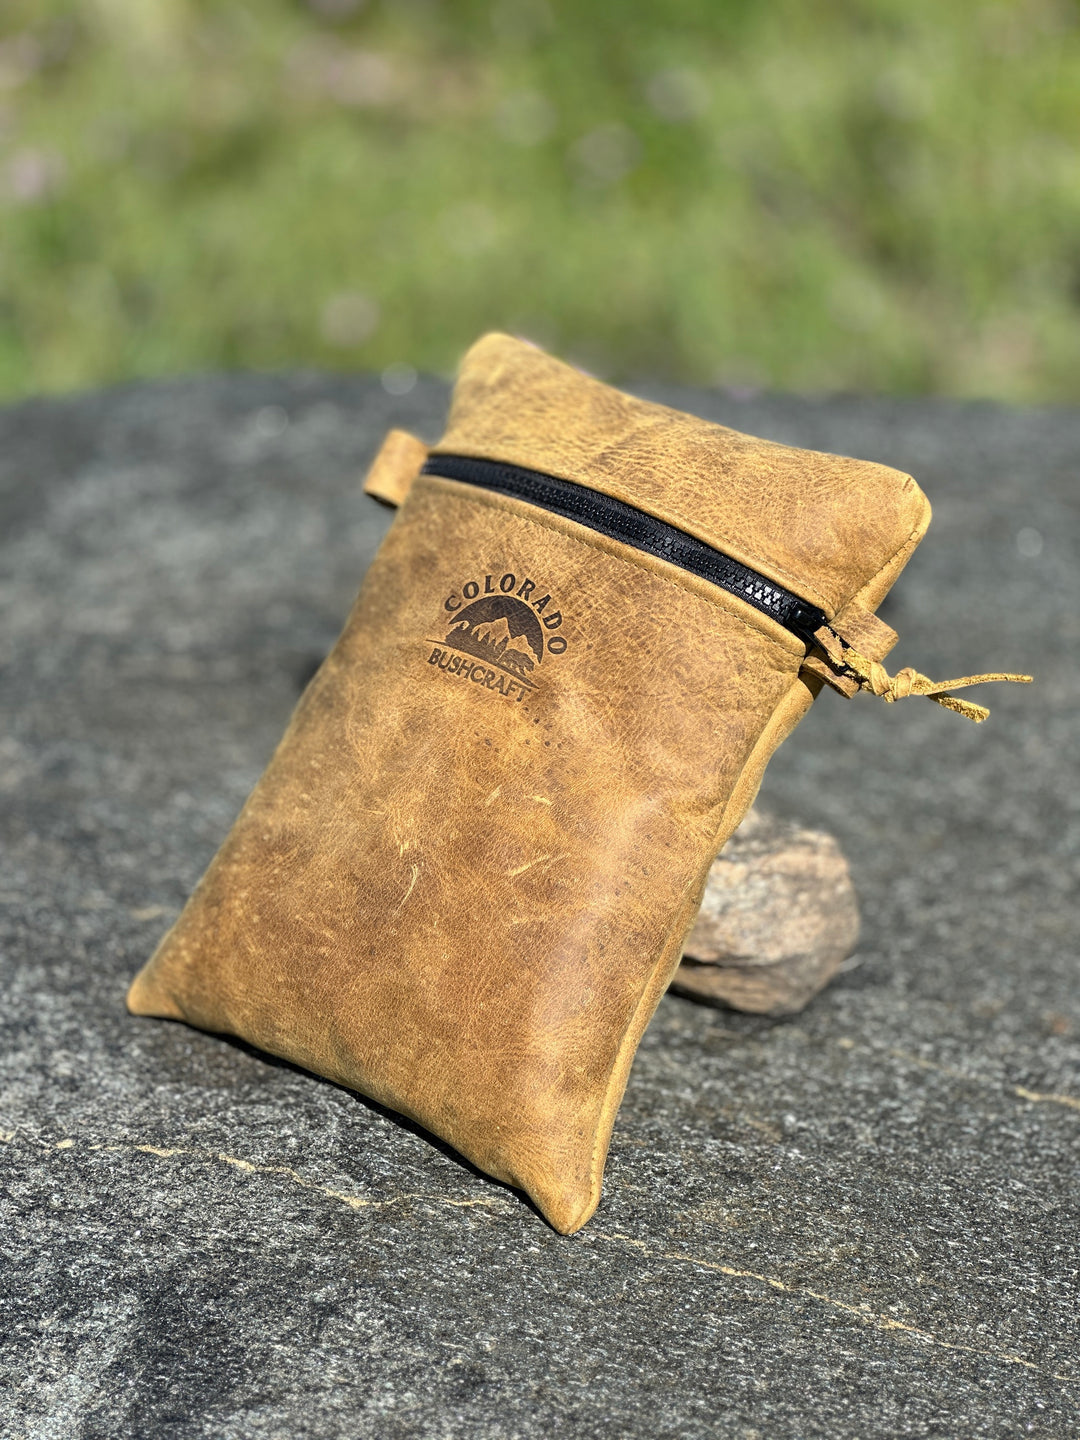 Crazy Horse Vintage Leather Traditional Large EDC Pouch Bushcraft Survival Camping Possibles Dopp Grooming